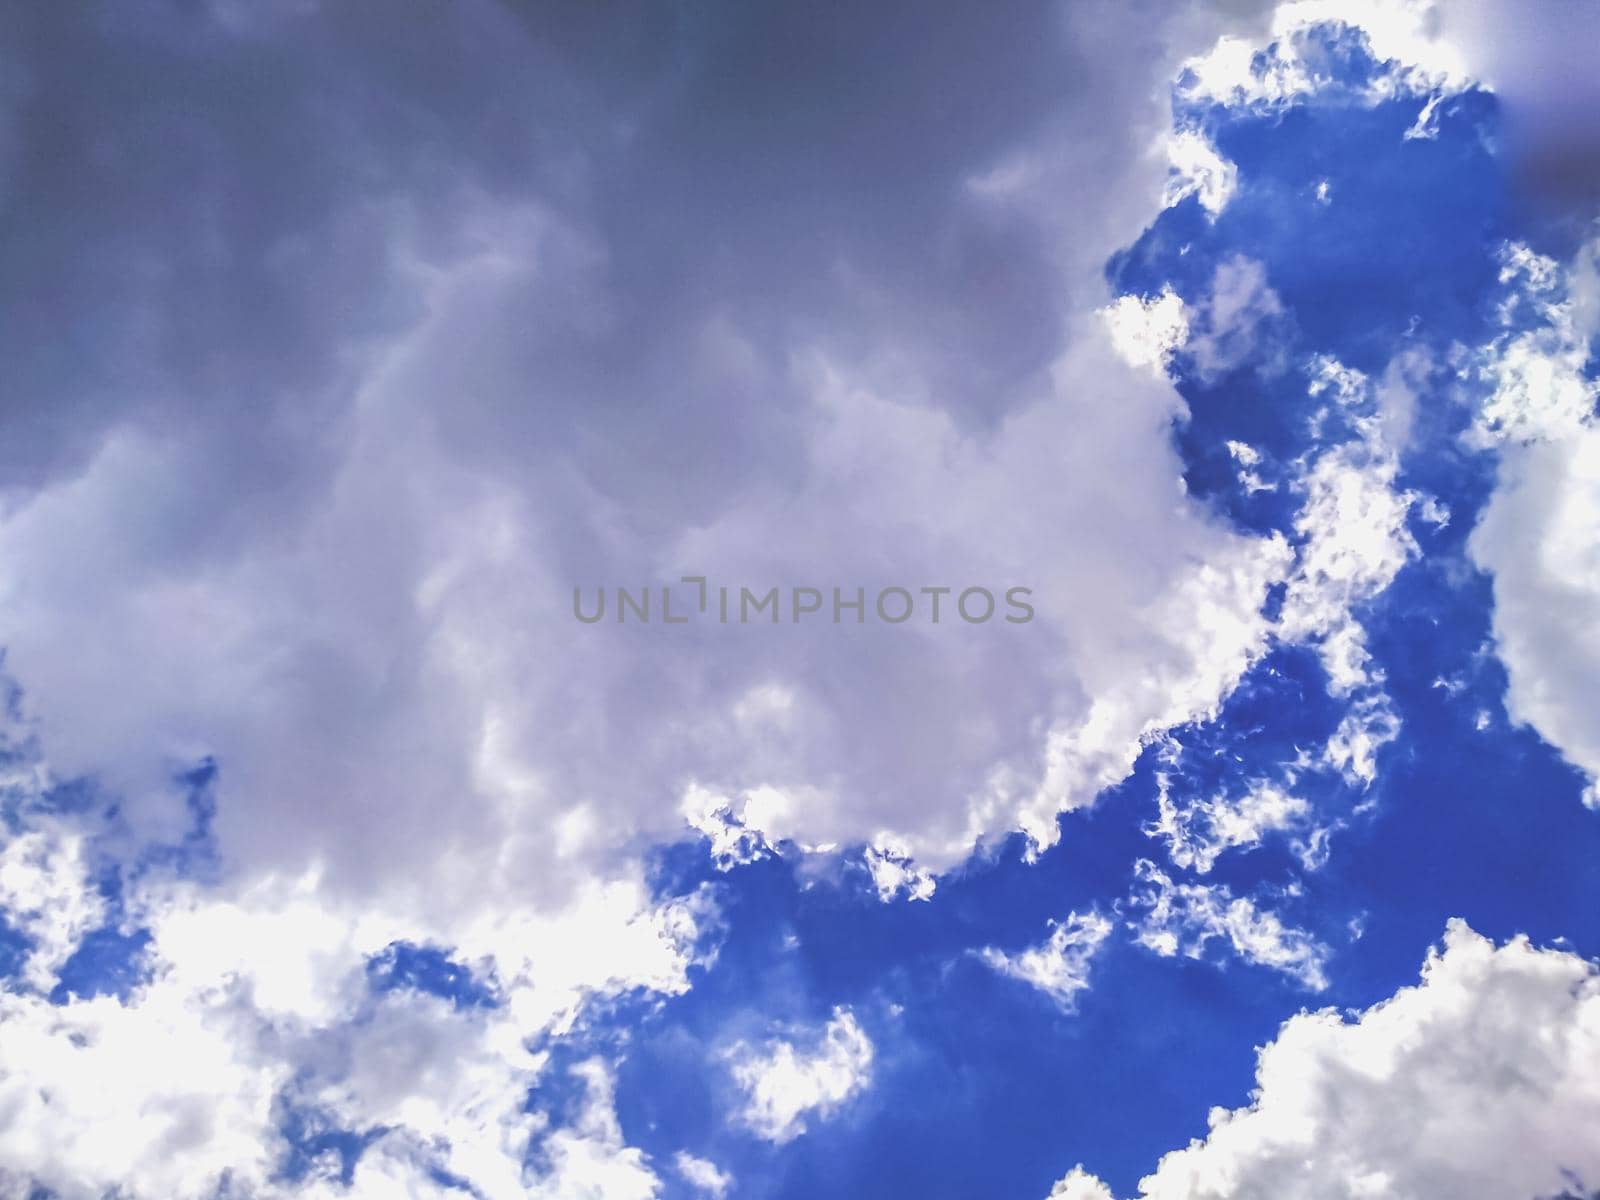 Huge white fluffys clouds sky background with blue sky background